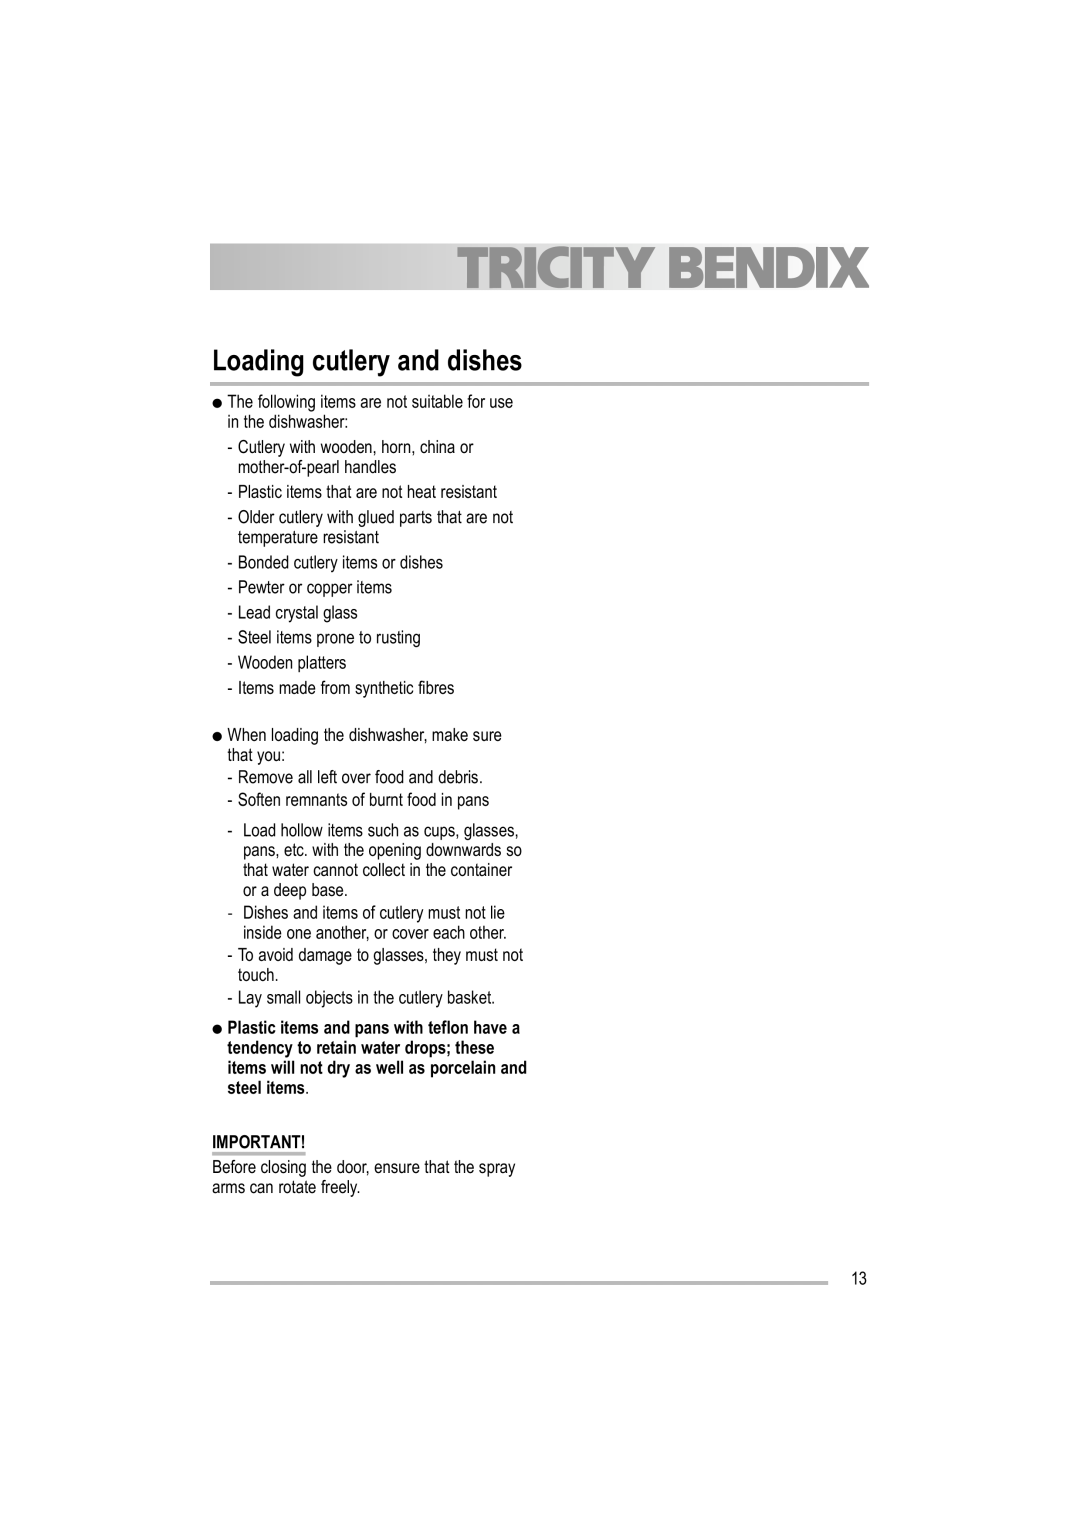 Tricity Bendix TBDW 32 manual Loading cutlery and dishes 